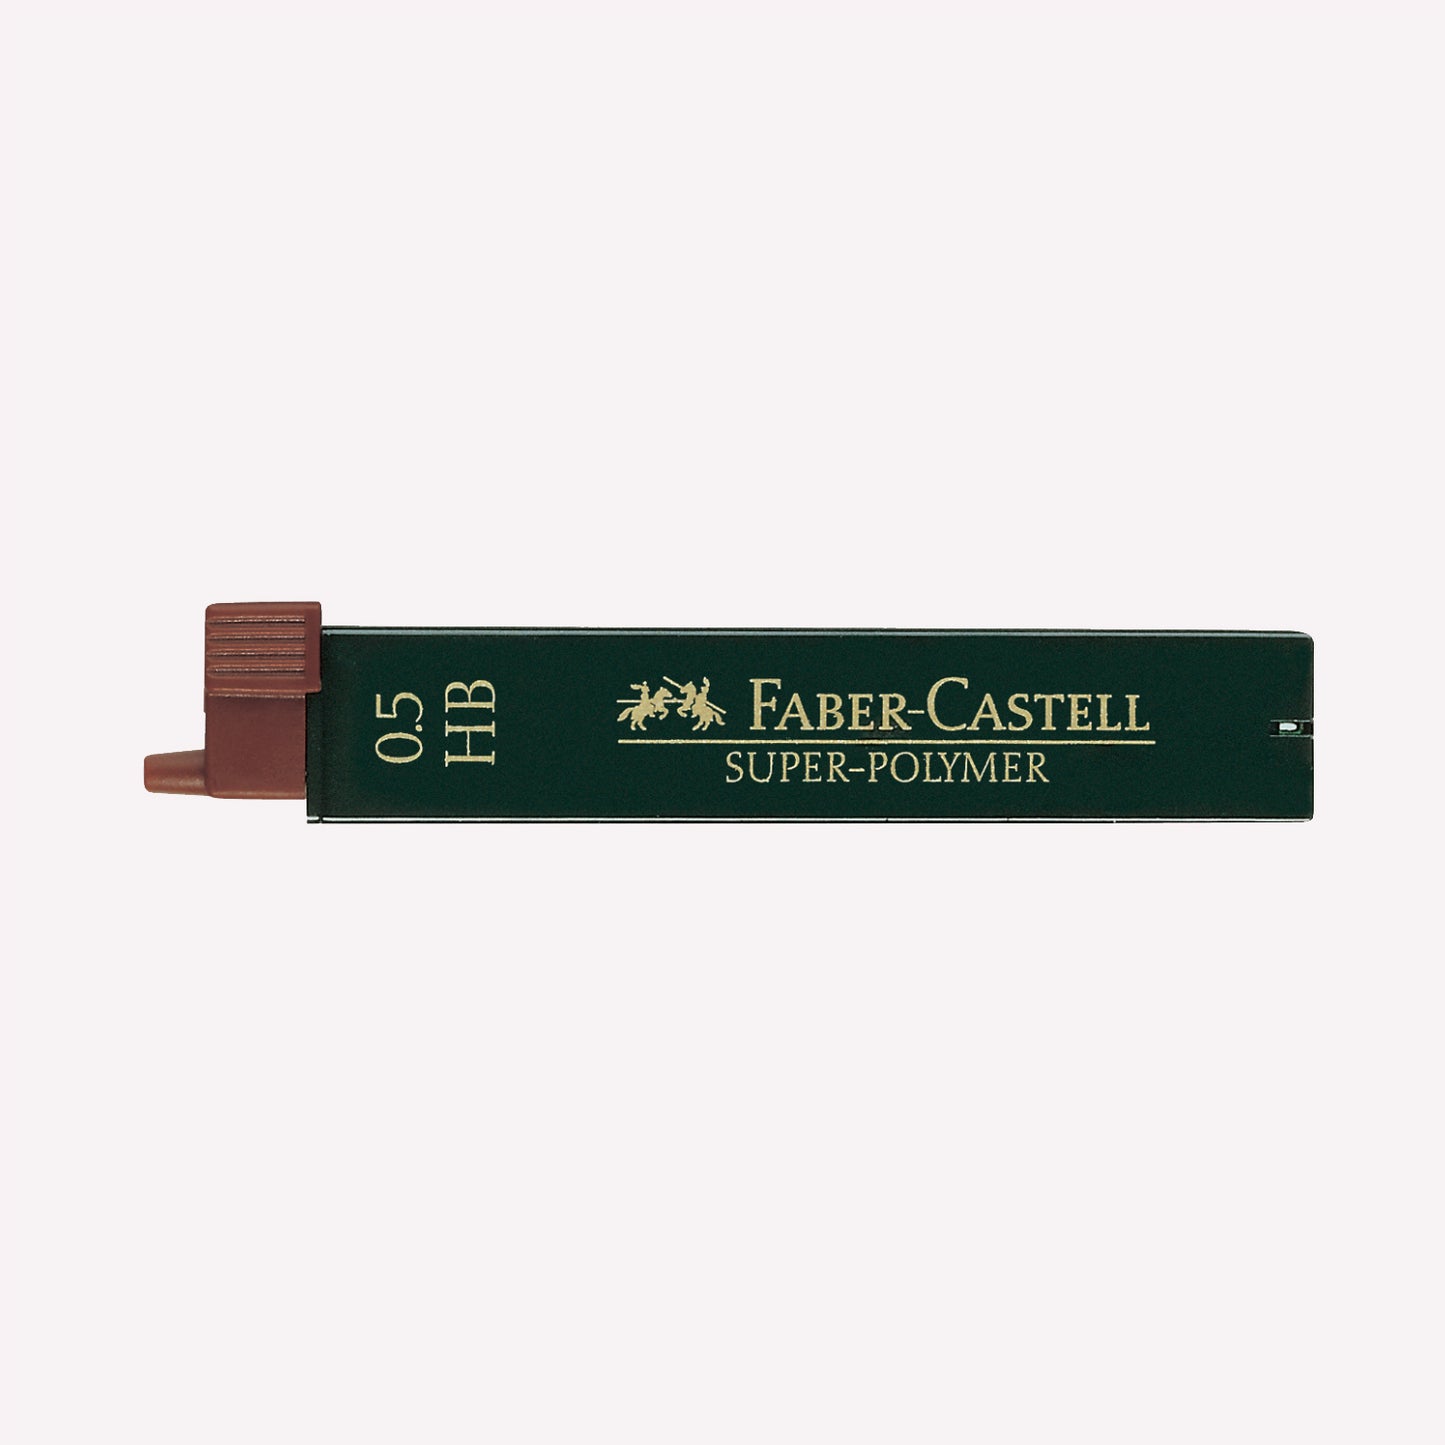 Faber Castell pack of 12 HB 0.5mm Super Polymer Leads in a green package with a brown lid. 